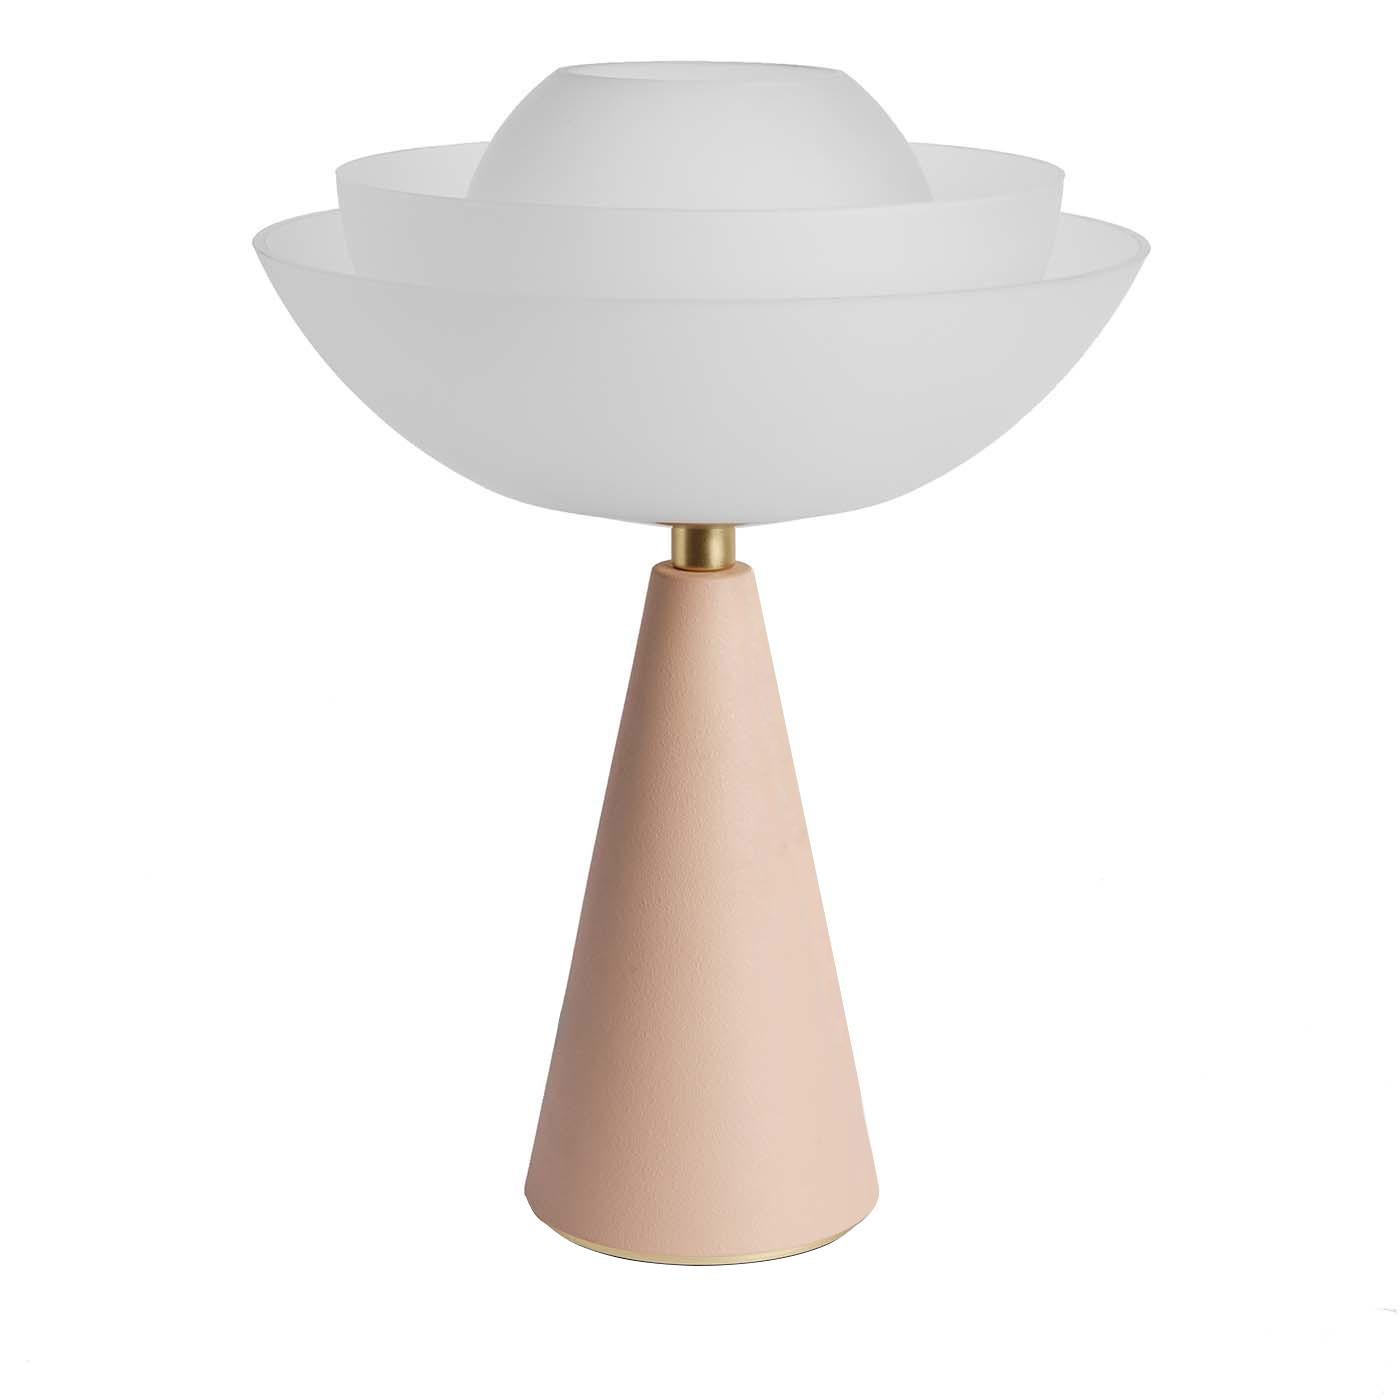 This sophisticated design by Serena Confalonieri is inspired by the lotus flower, symbol of perfection, purity and grace. Sensual and elegant, this table lamp has a 1960s vibe with a conical base made of iron and finished in a romantic, pastel shade